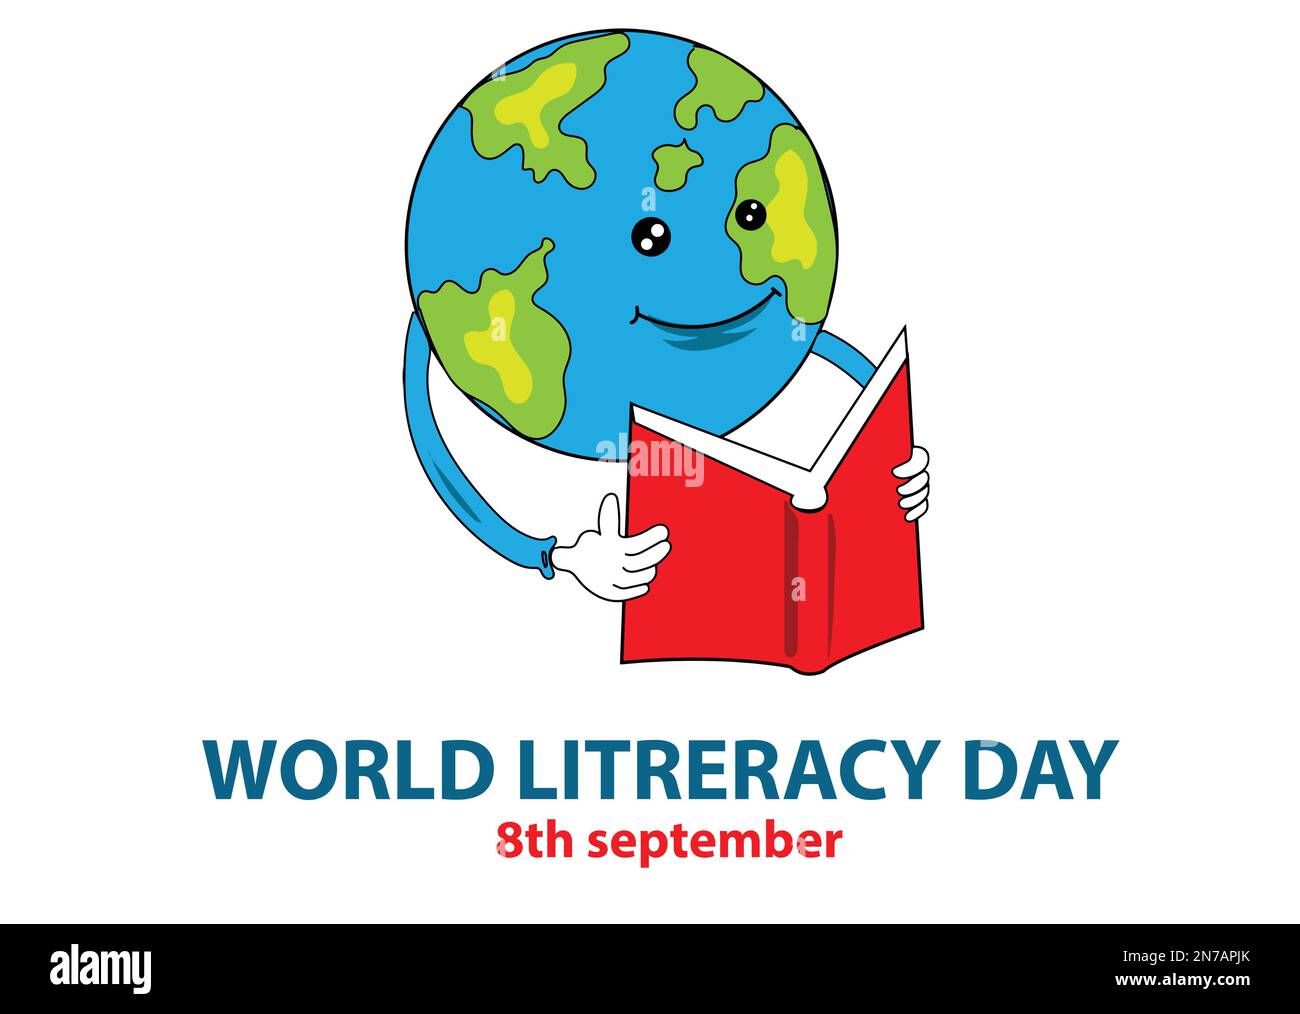 World Literacy day poster Stock Vector